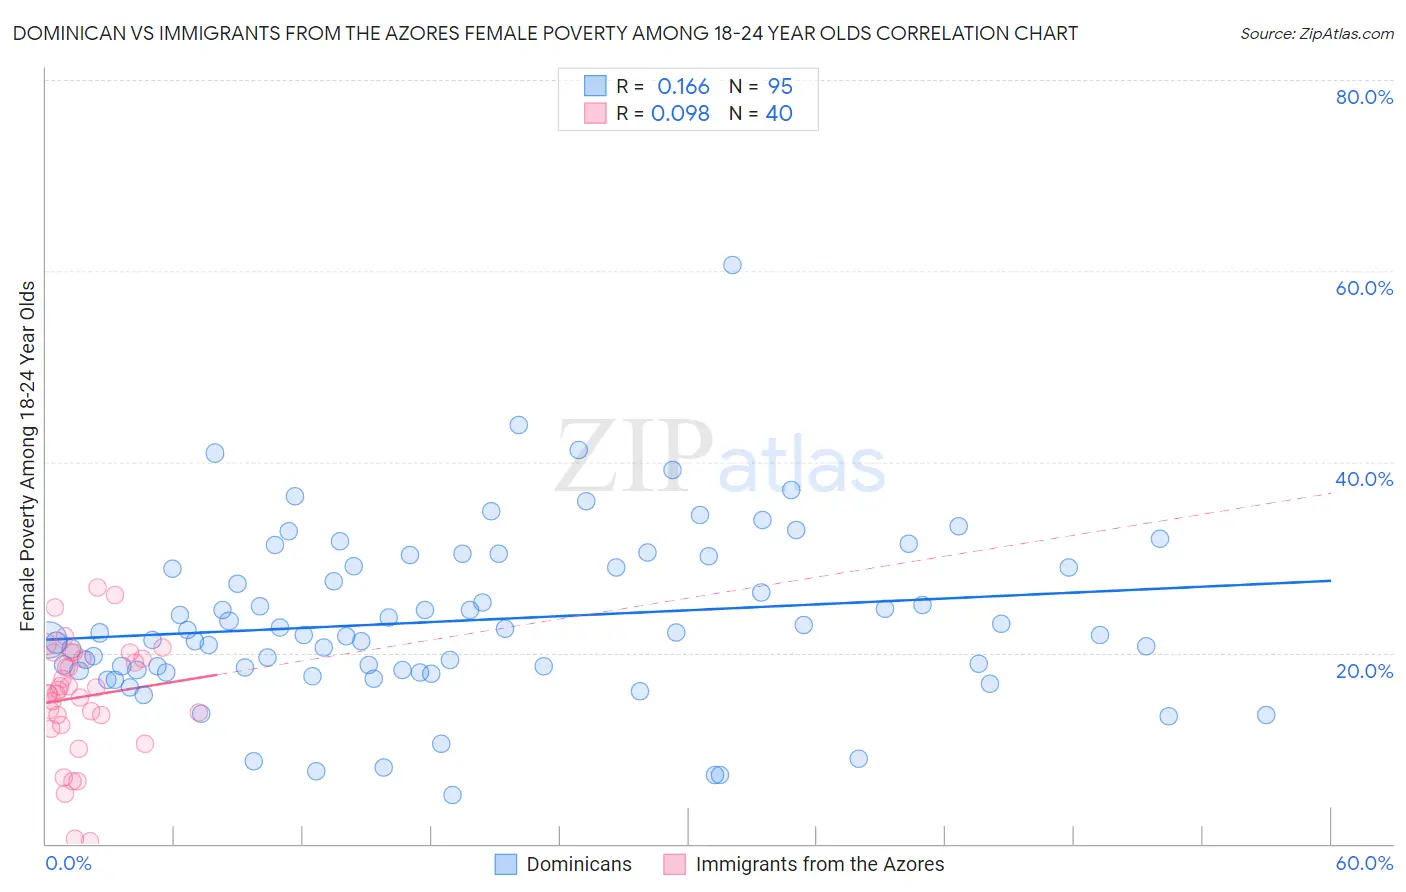 Dominican vs Immigrants from the Azores Female Poverty Among 18-24 Year Olds